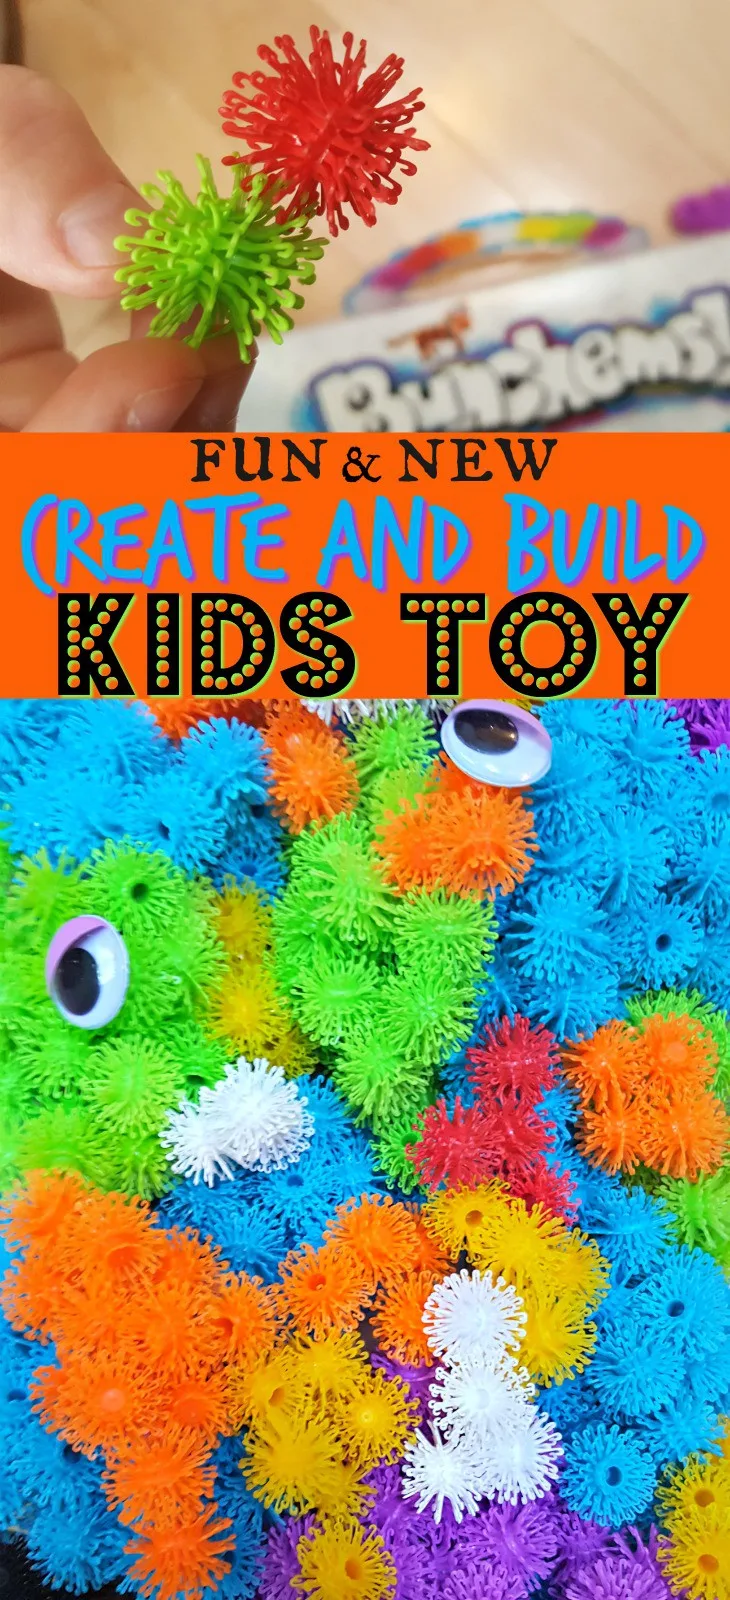 Need a great gift idea for a kids birthday or for Christmas? This new build and create toy is great for encouraging kids' imaginative play!